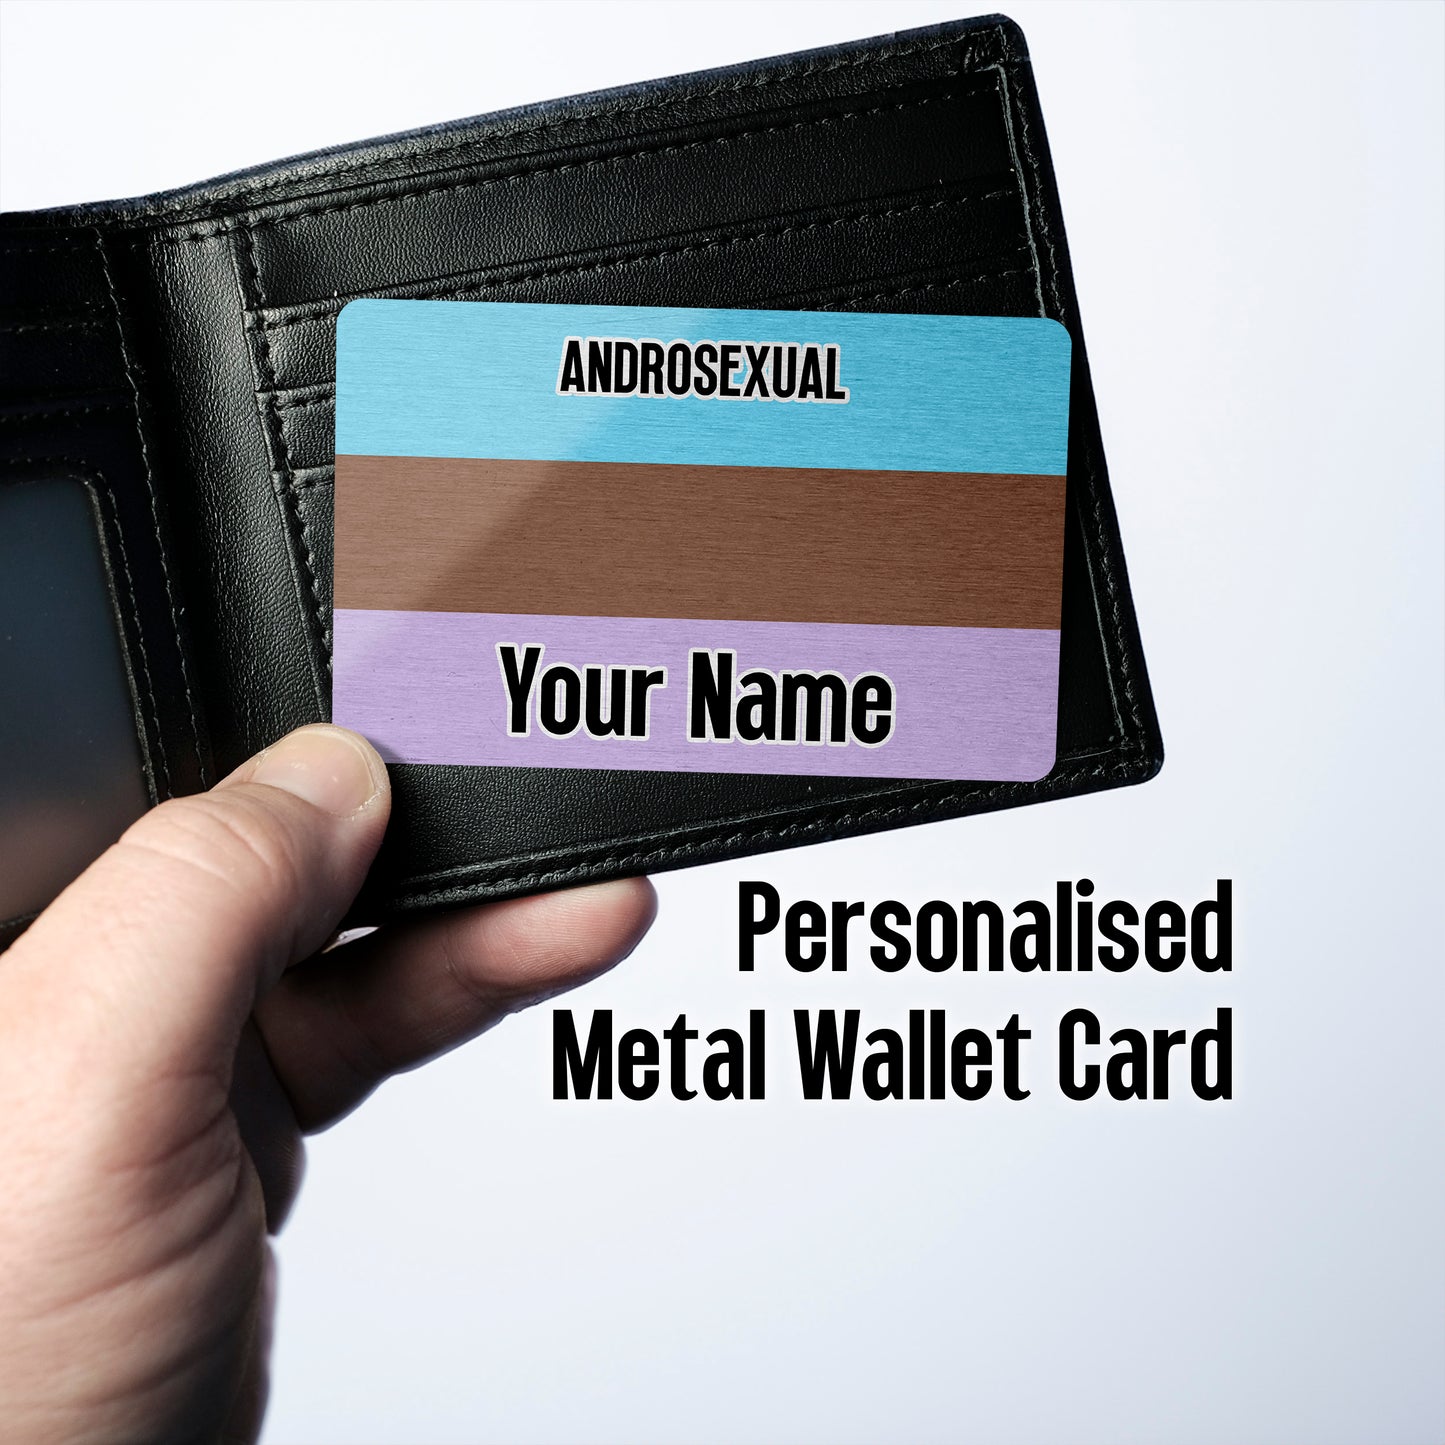 Aluminium wallet card personalised with your name and the androsexual pride flag